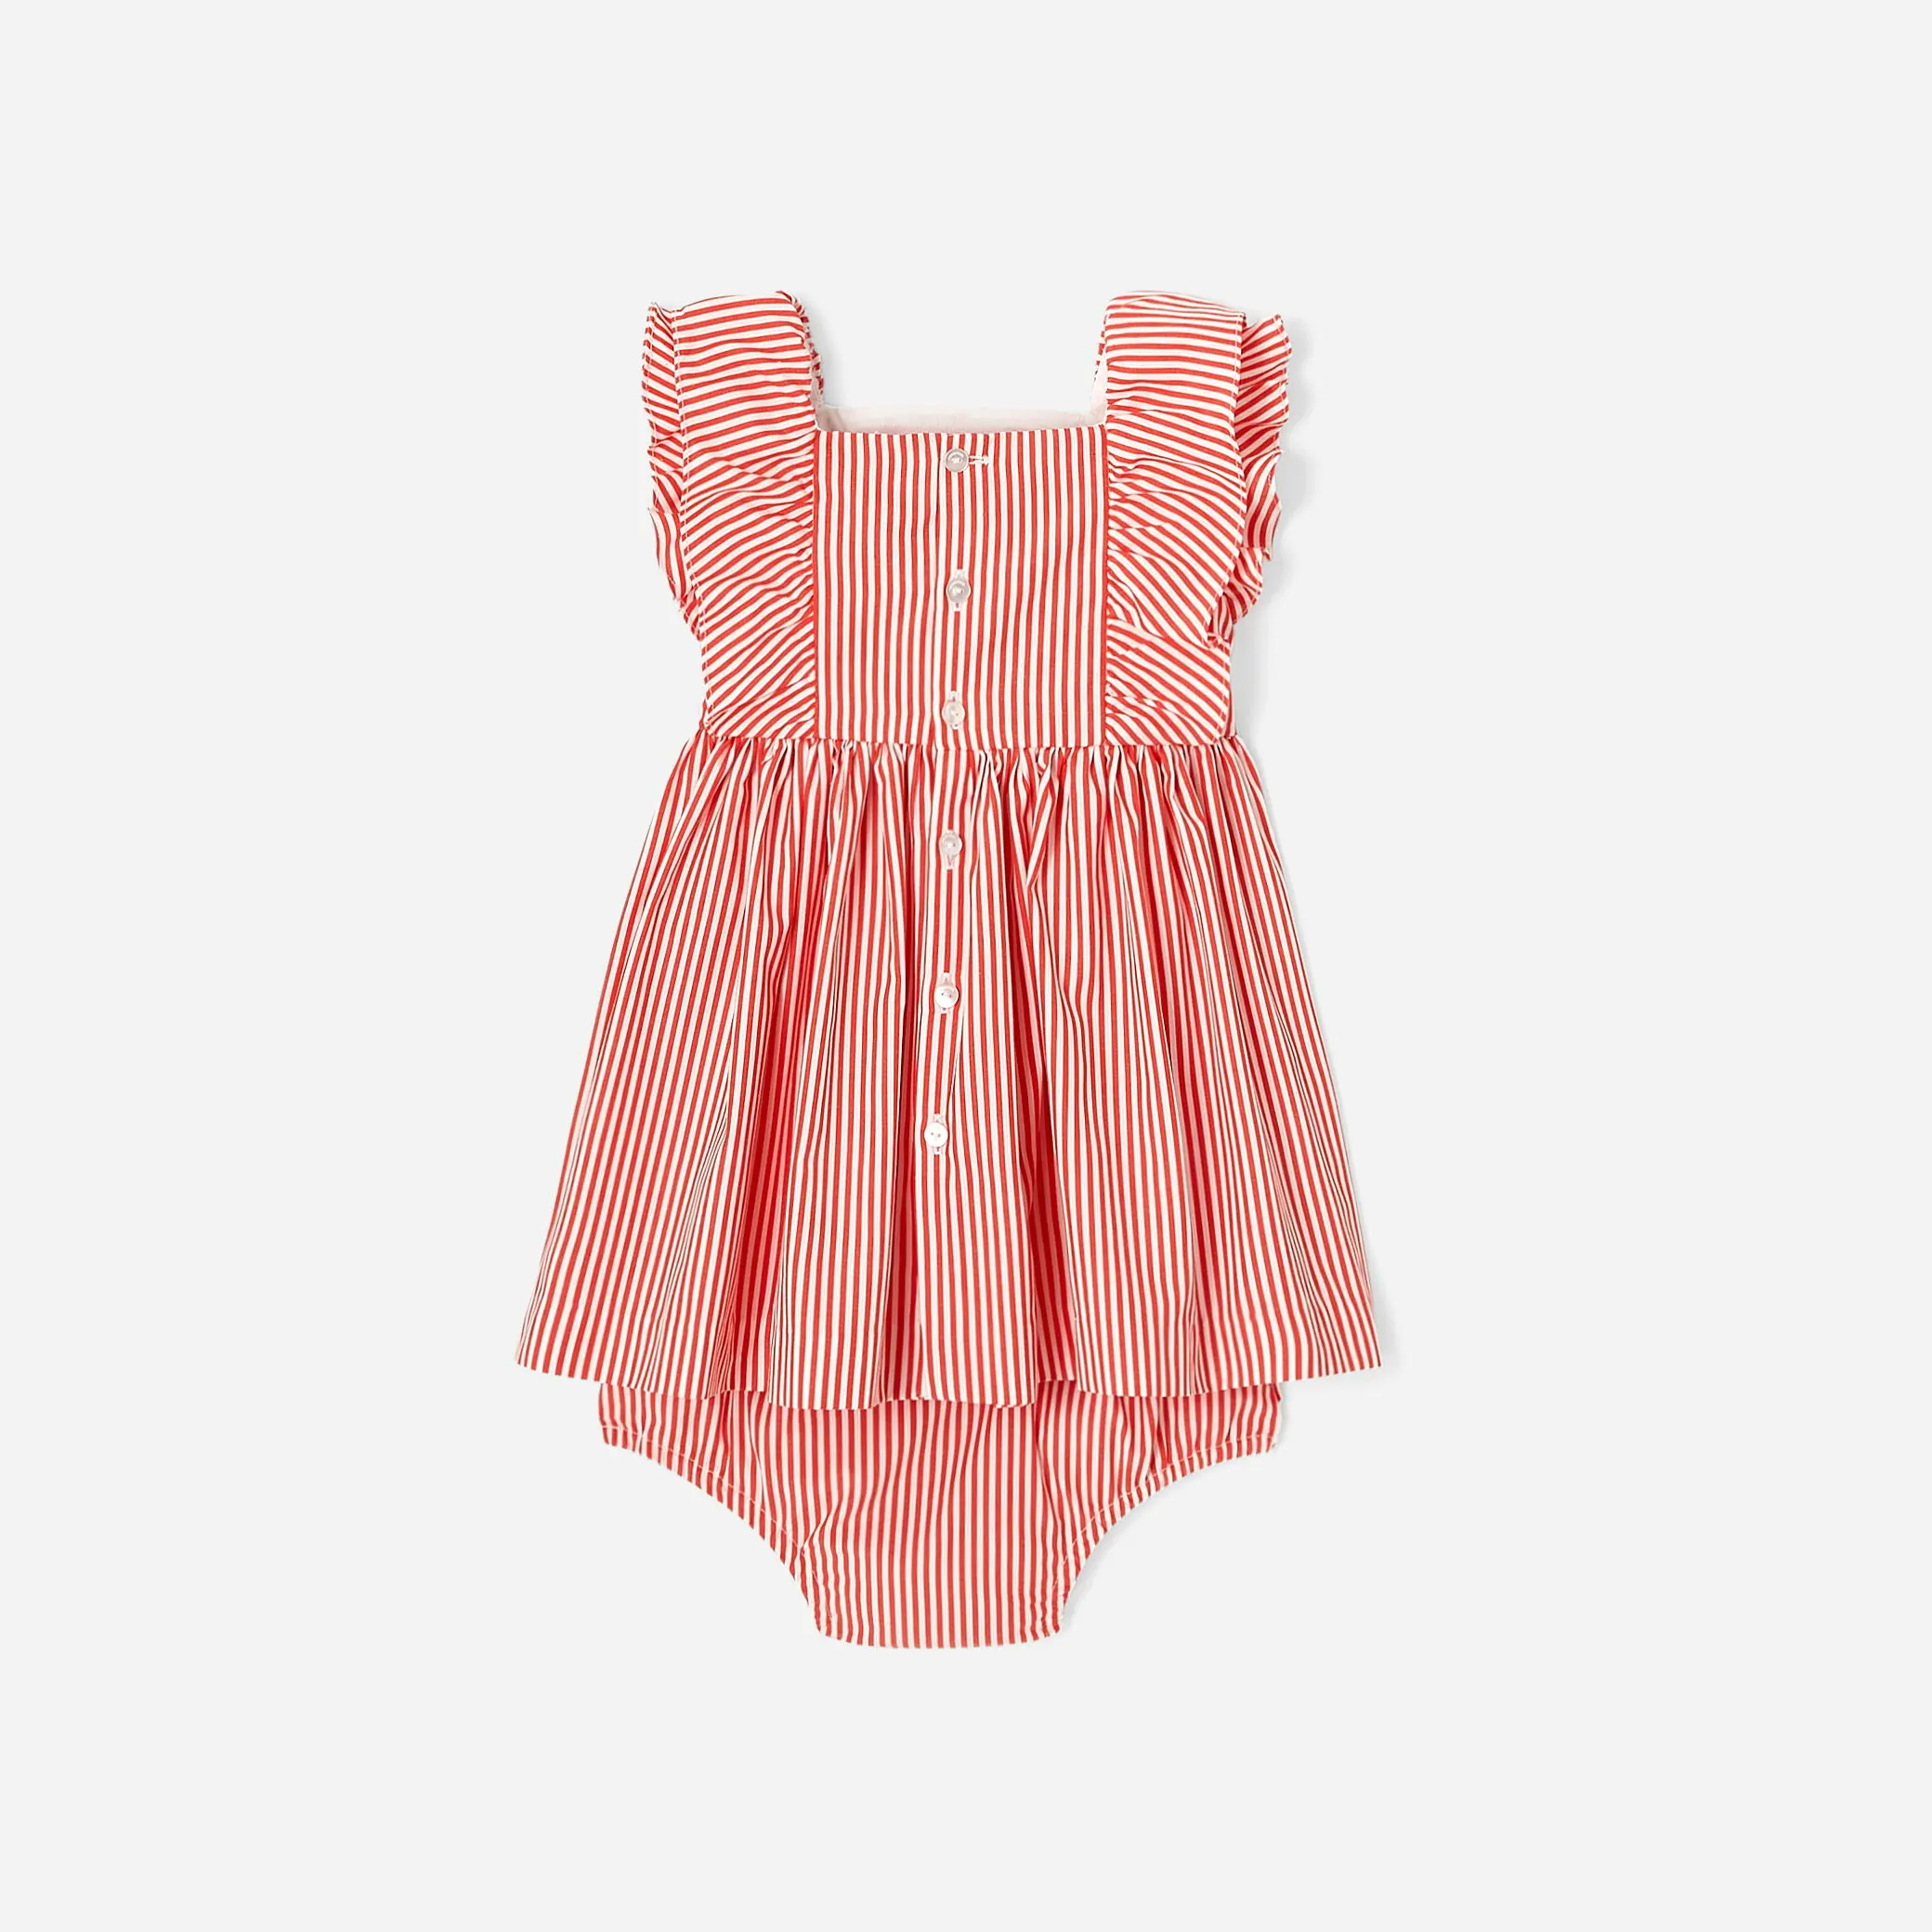 2022 Summer Baby Girls Dresses Casual Fashion striped ruffle dress for kids girl 3-10 Y